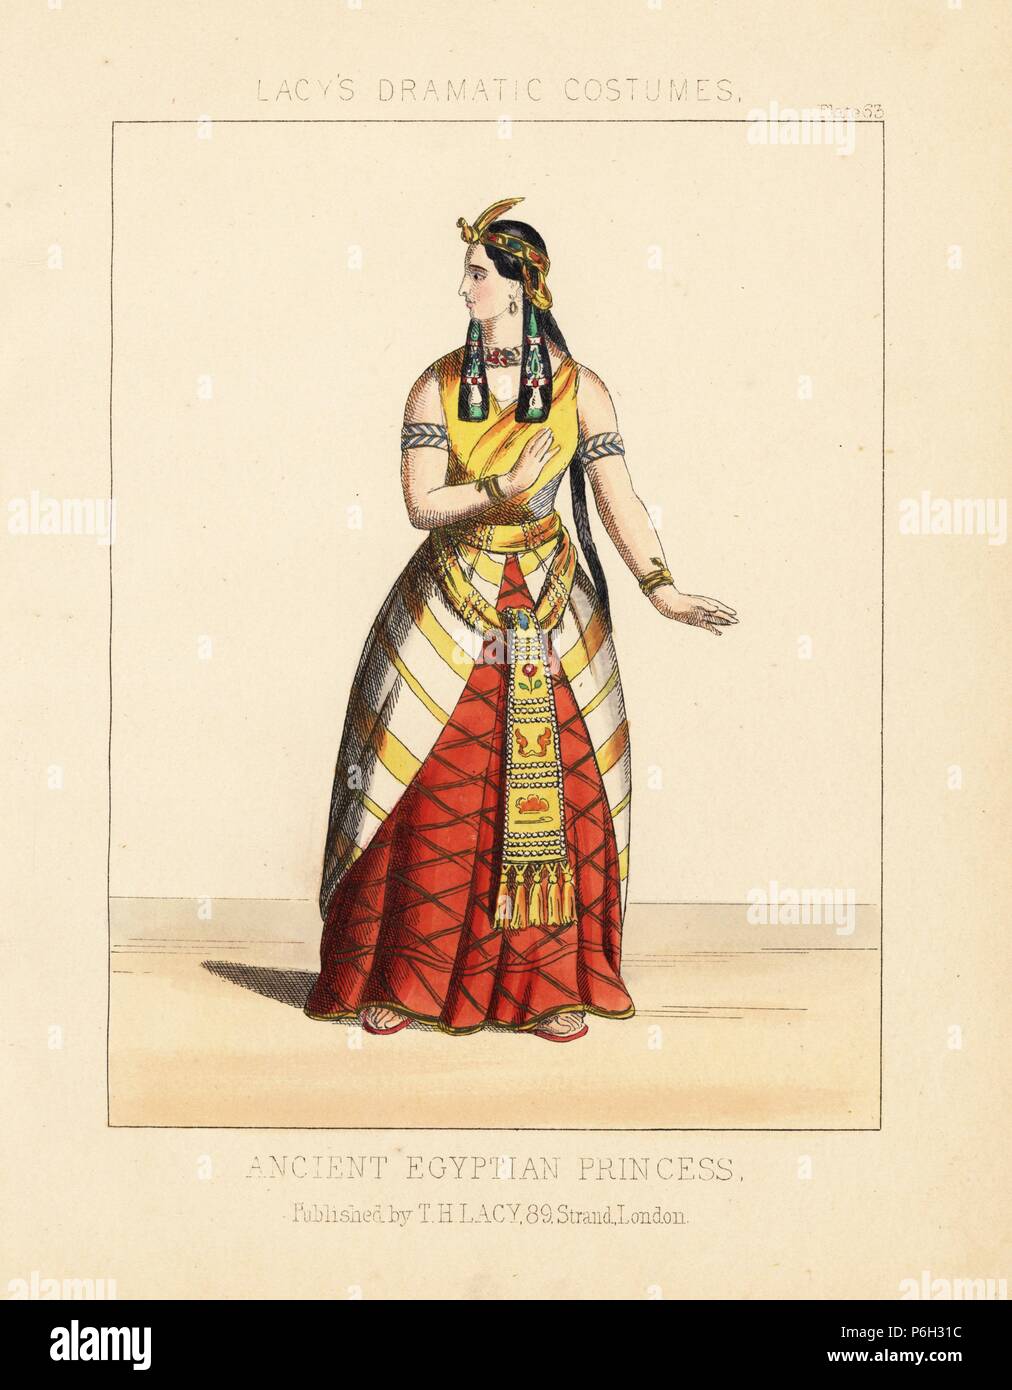 Costume of an ancient Egyptian princess, 19th century. Handcoloured lithograph from Thomas Hailes Lacy's 'Female Costumes Historical, National and Dramatic in 200 Plates,' London, 1865. Lacy (1809-1873) was a British actor, playwright, theatrical manager and publisher. Stock Photo